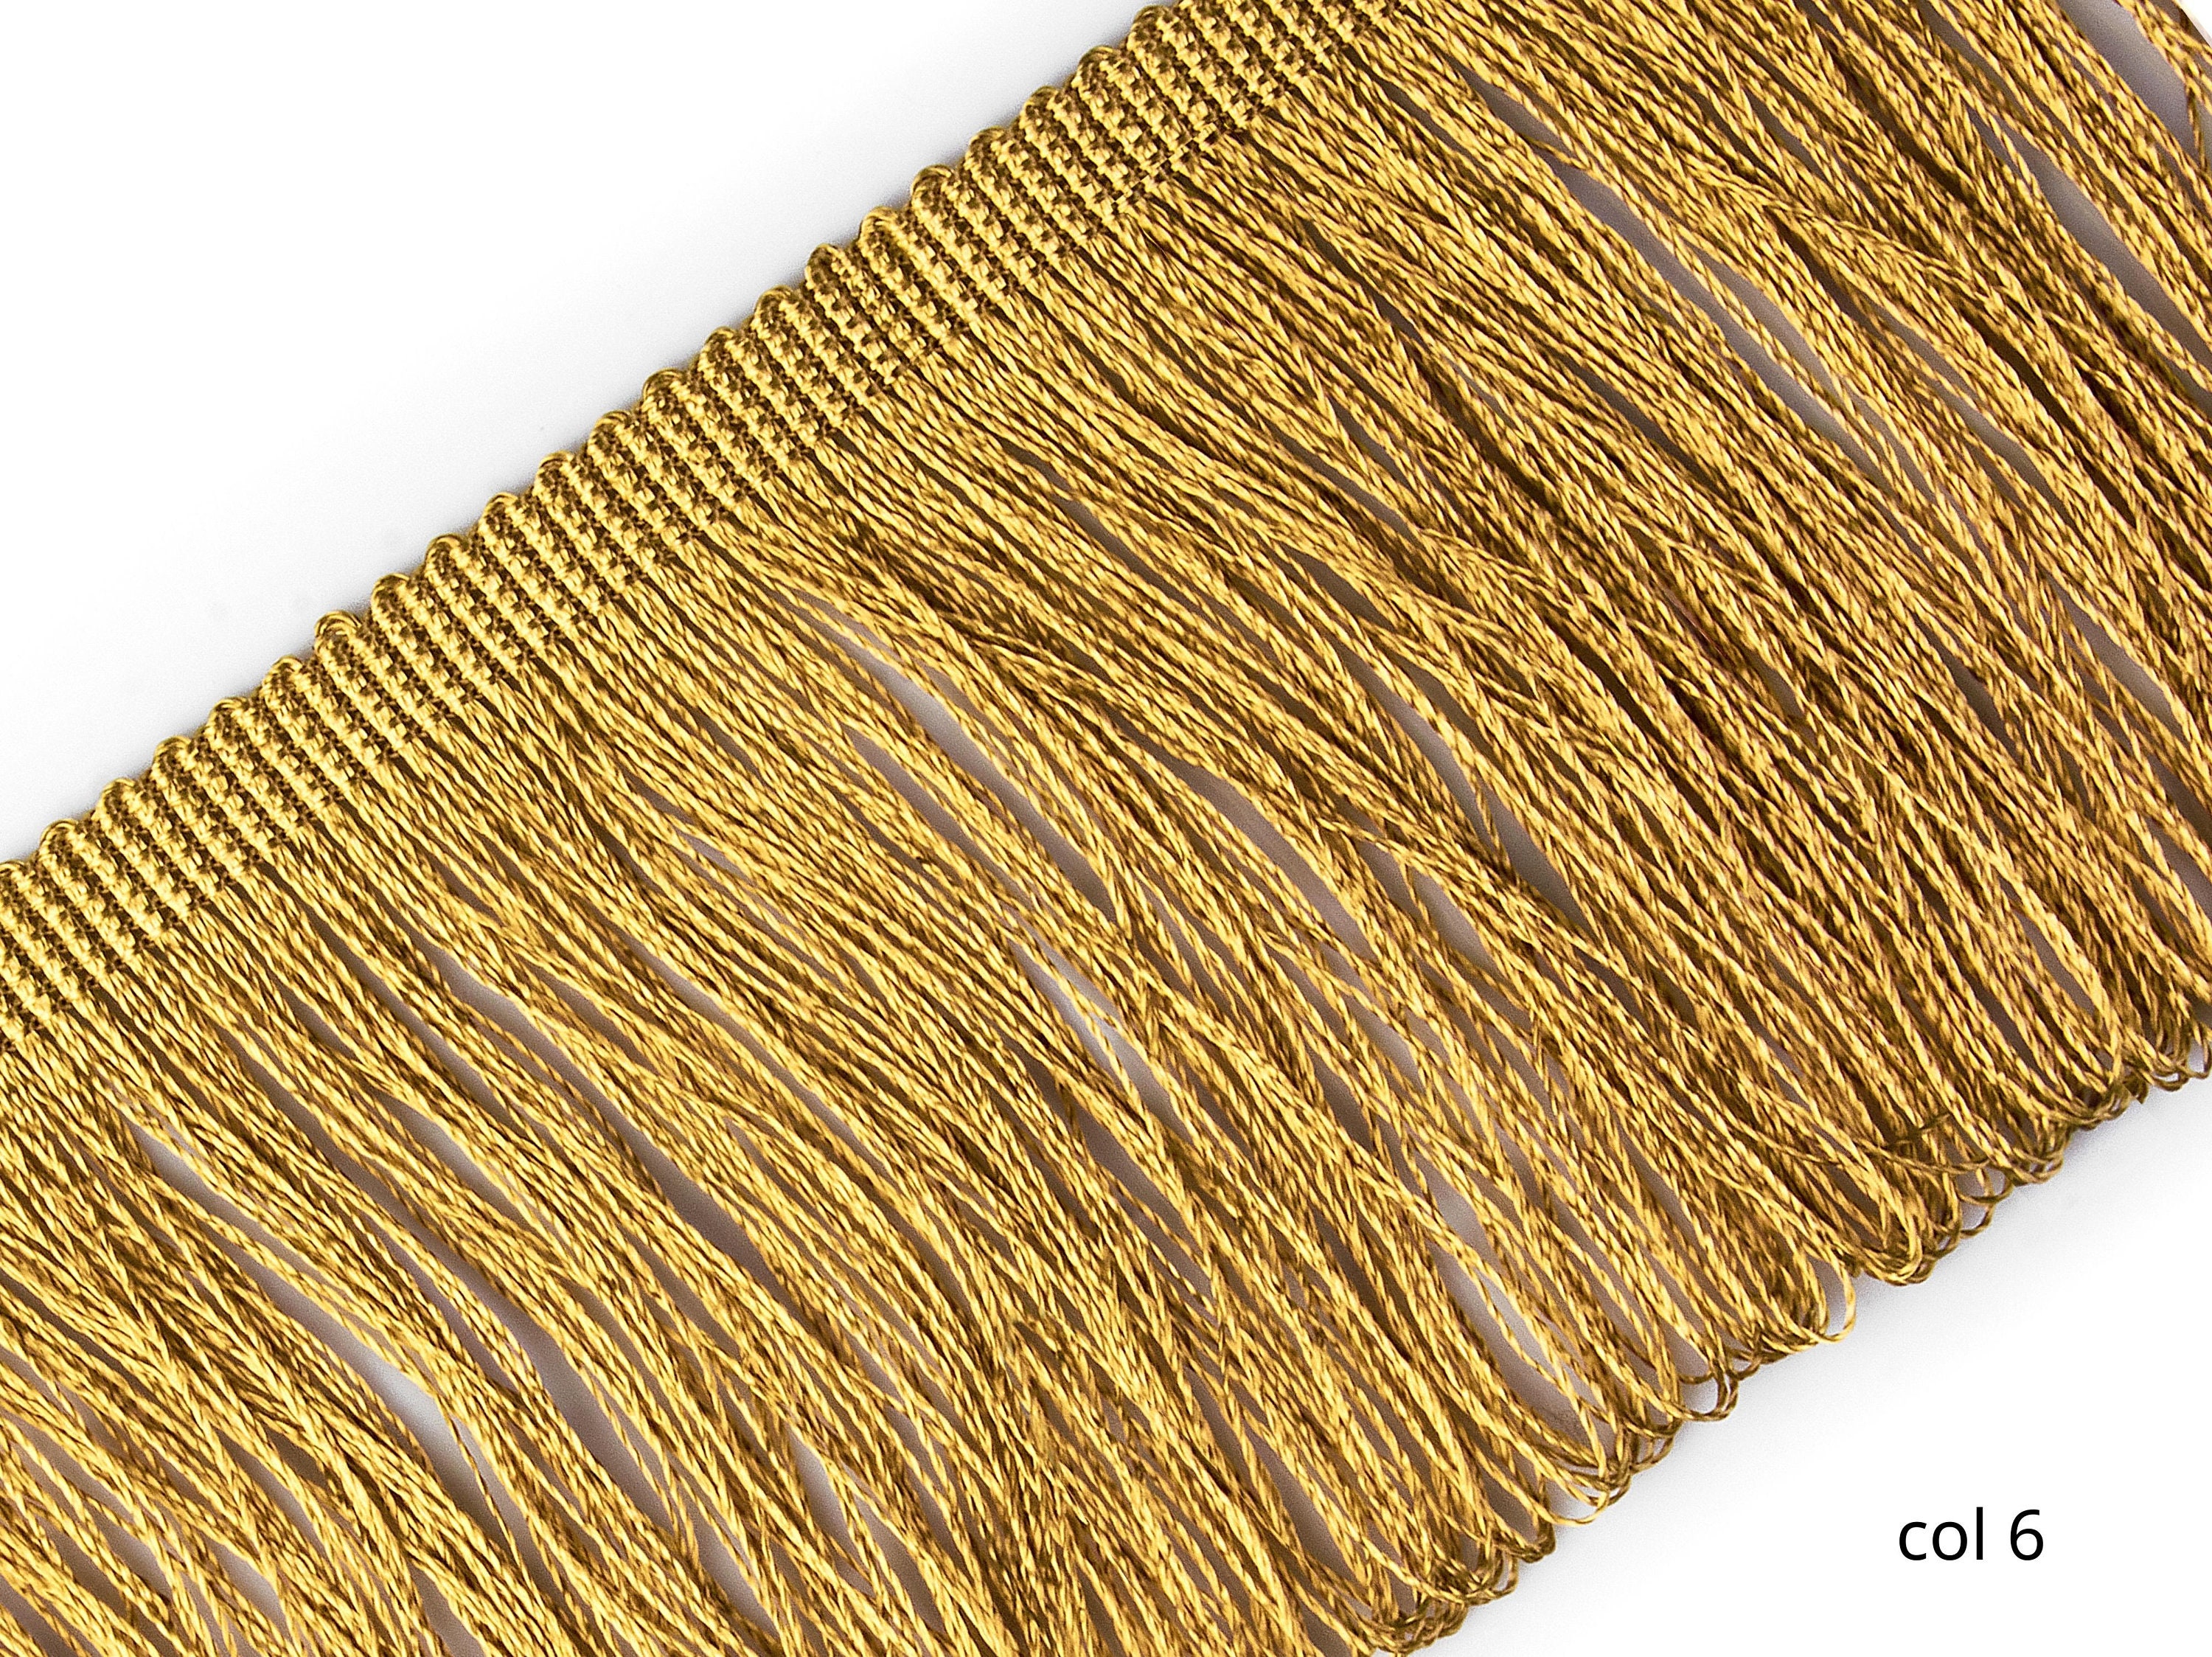 6 inch (10 cm) Gold Metallic Chainette Fringe. Metallic Chainette Fringe Adds Movement and A Bit of Drama to Anything It Is Applied TO. Perfect for